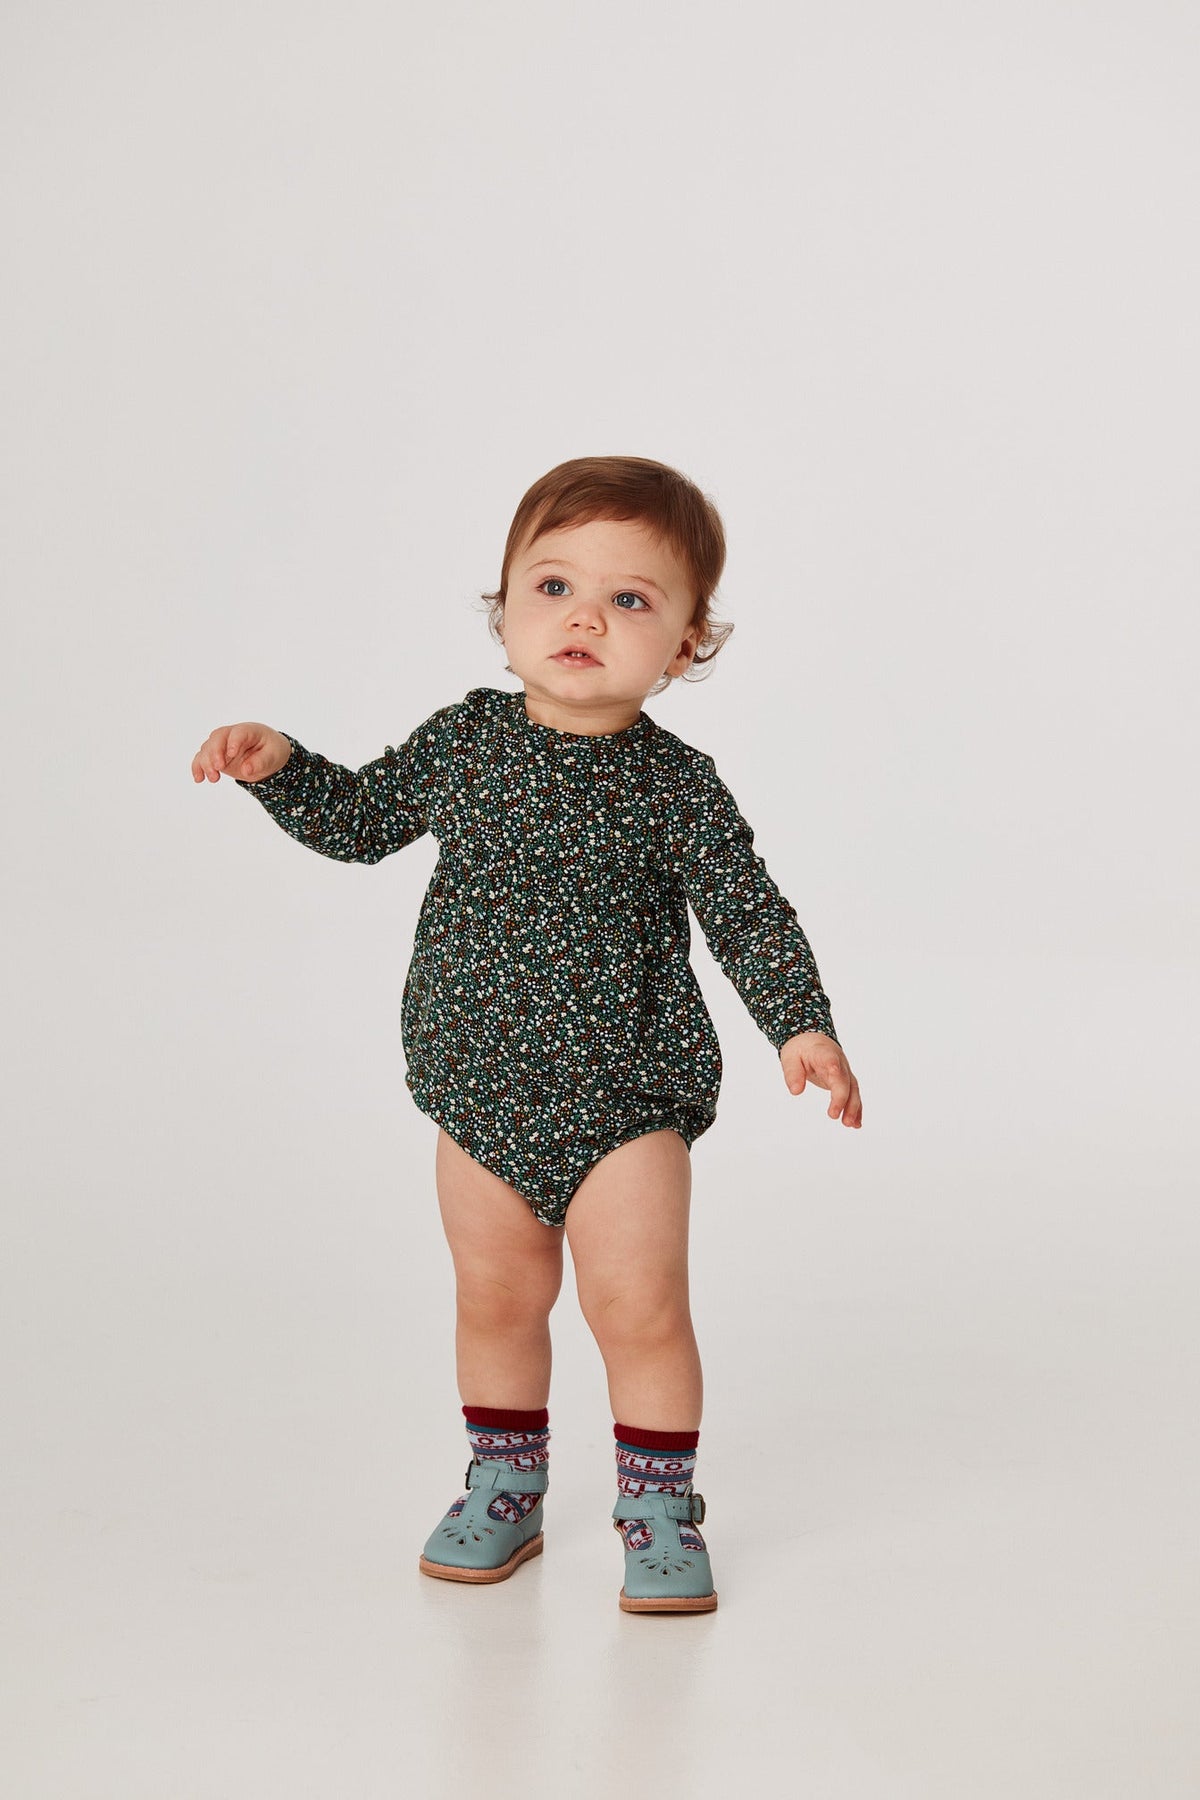 Balloon Romper - Emerald Mini Floral+Model is 31 inches tall, 23lbs, wearing a size 12-18m